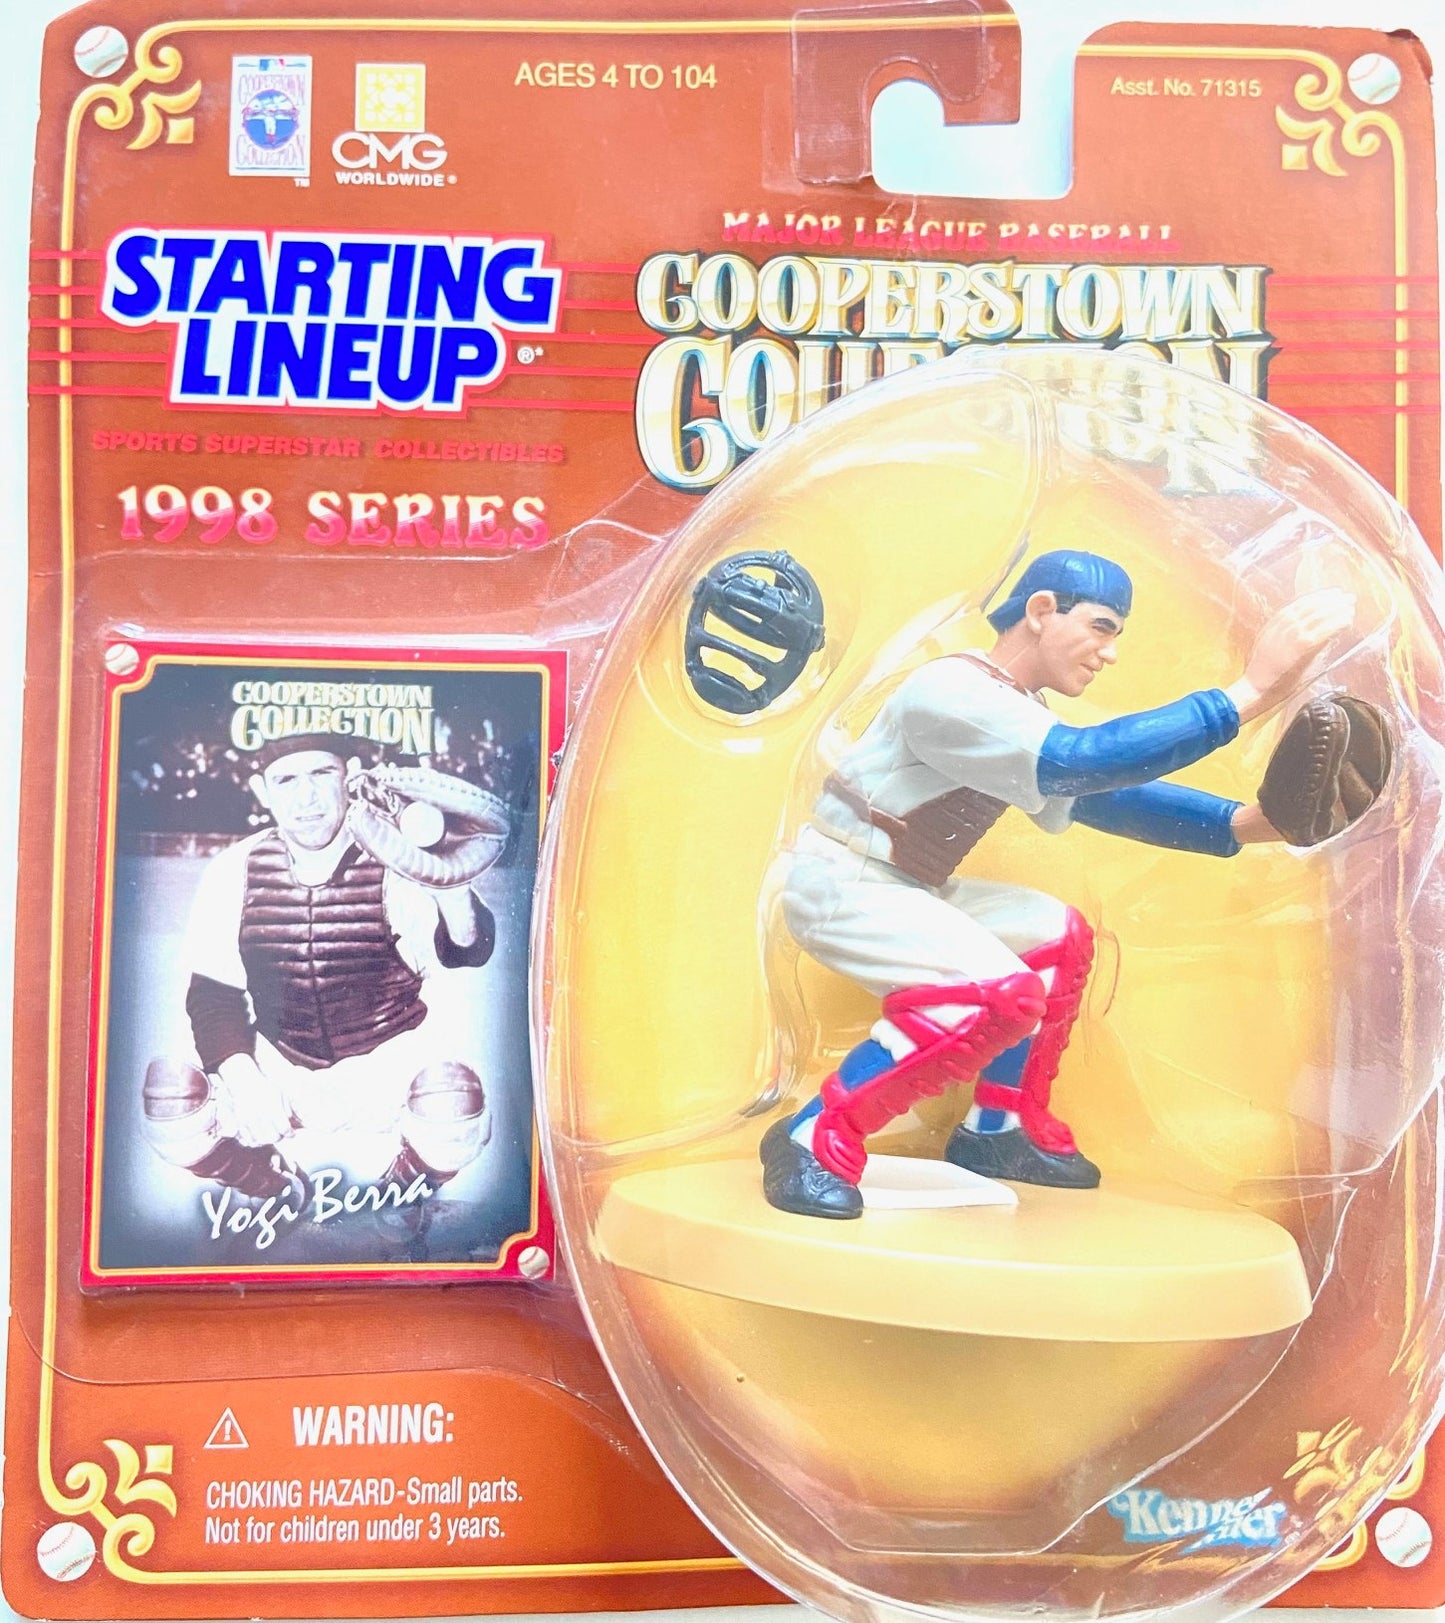 Yogi Berra 1998 Cooperstown Collection Starting Lineup MLB Figurine (New) by Kenner